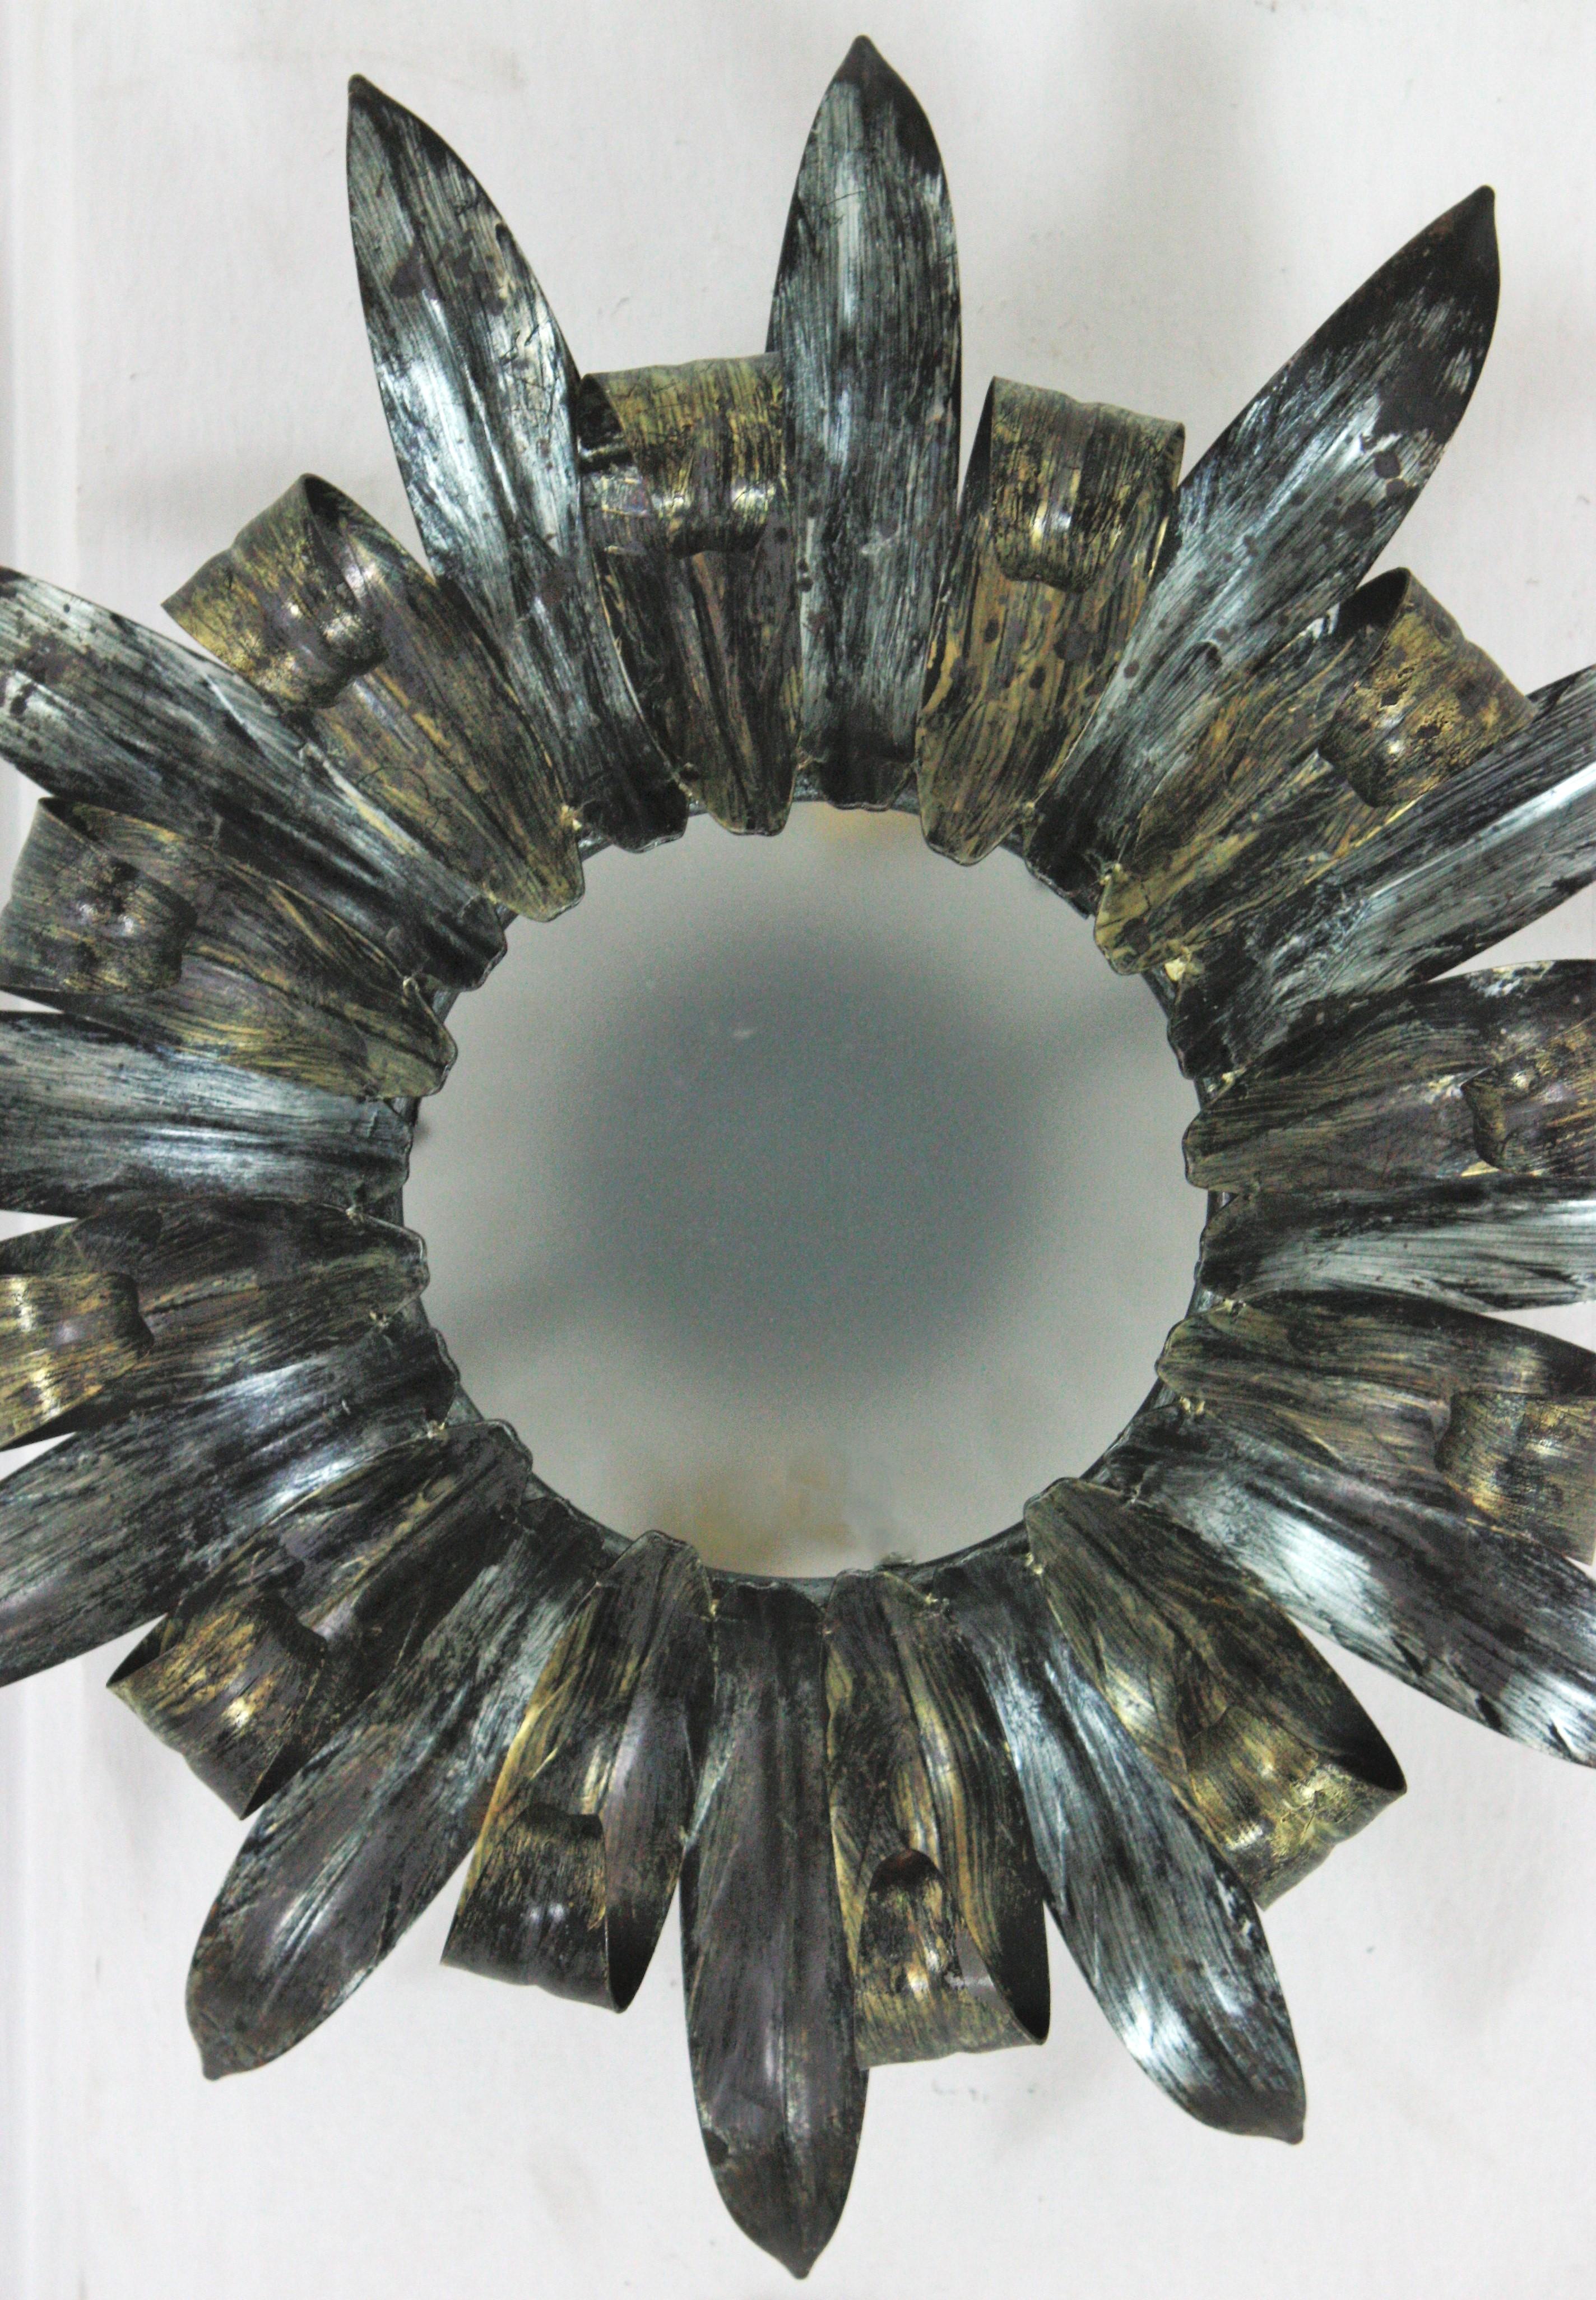 Sunburst Eyelash Flush Mount Light Fixture, Silvered Metal and Frosted Glass In Good Condition For Sale In Barcelona, ES